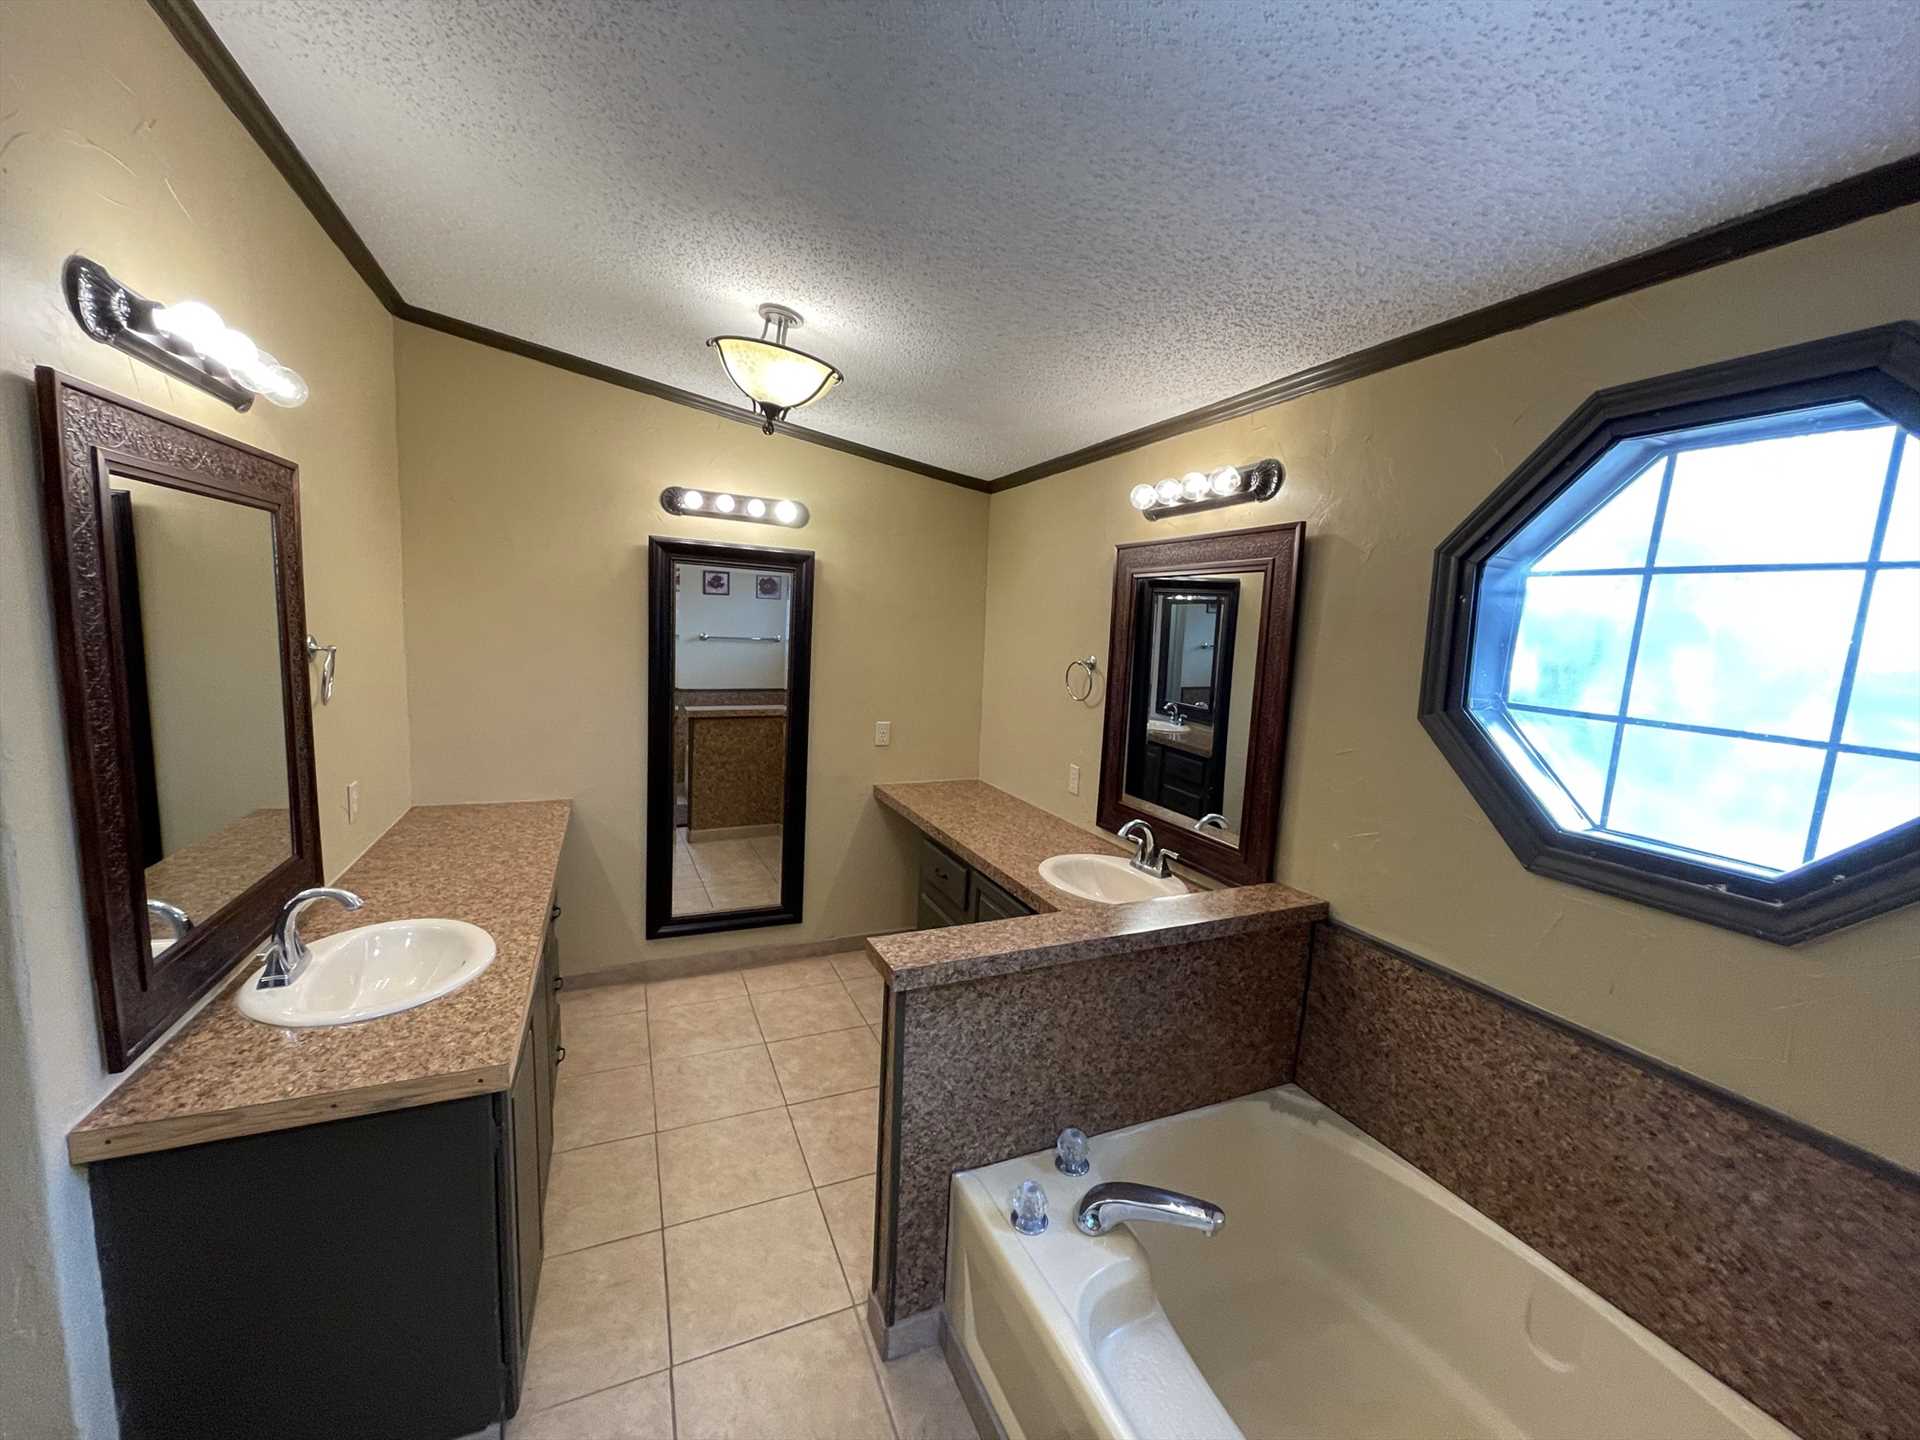                                                 Sharp and modern decor distinguishes the master bath of Rio Vista, which includes a roomy tub and separate shower.